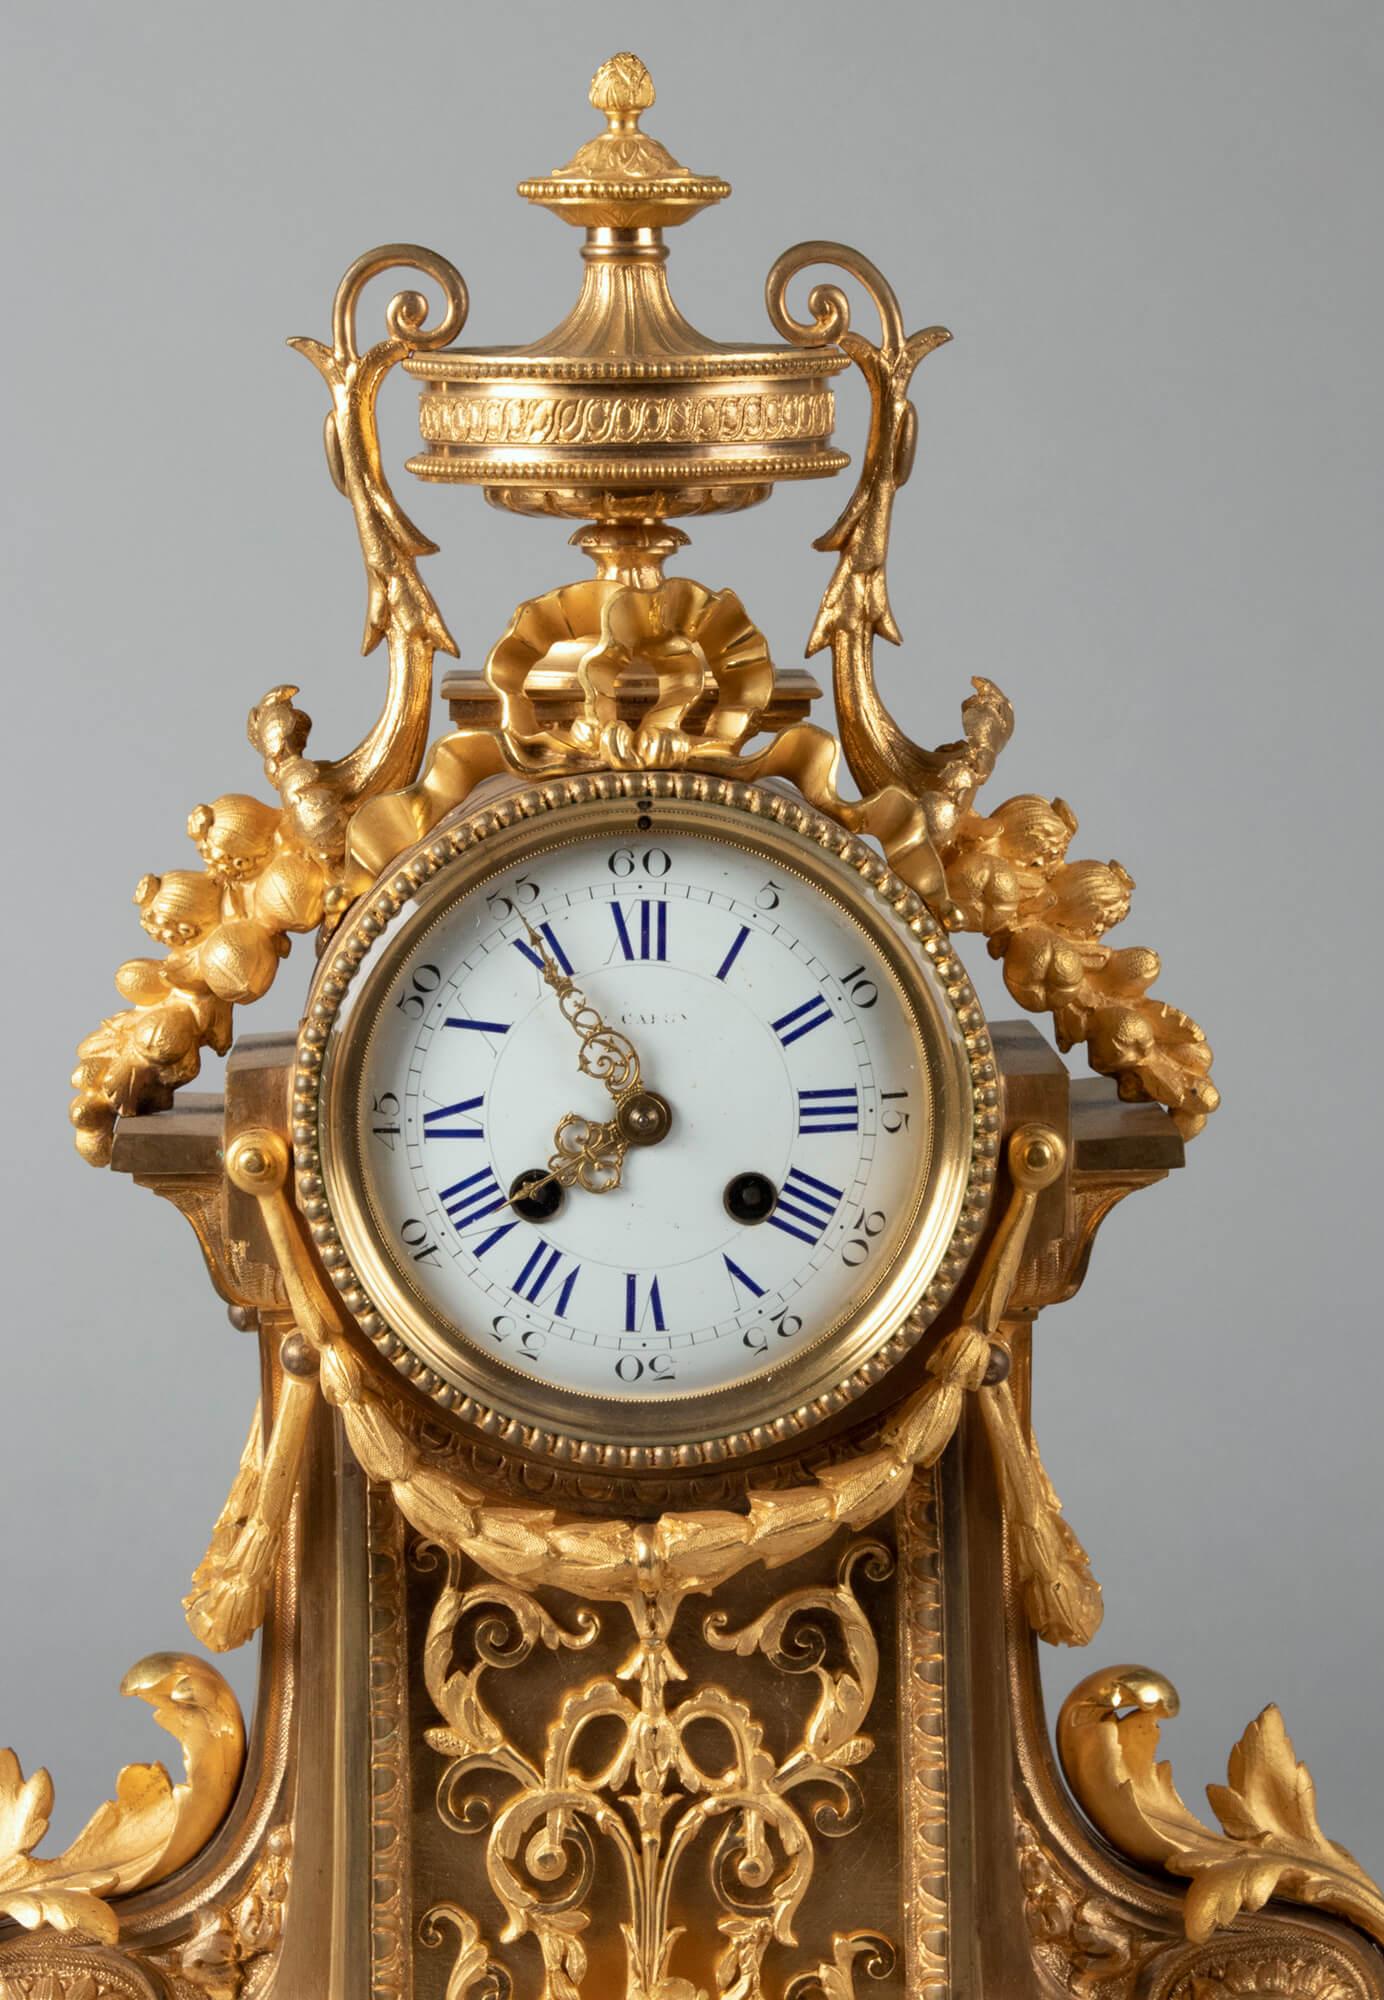 An elegant epoque Louis XVI French ormolu mantel clock in. The clock is bronze casted and gilded, the dial is enameled. Richly embellished with neoclassical ornaments such as garlands, ribbons and scrolls. The clock dates from the Louis XVI period,